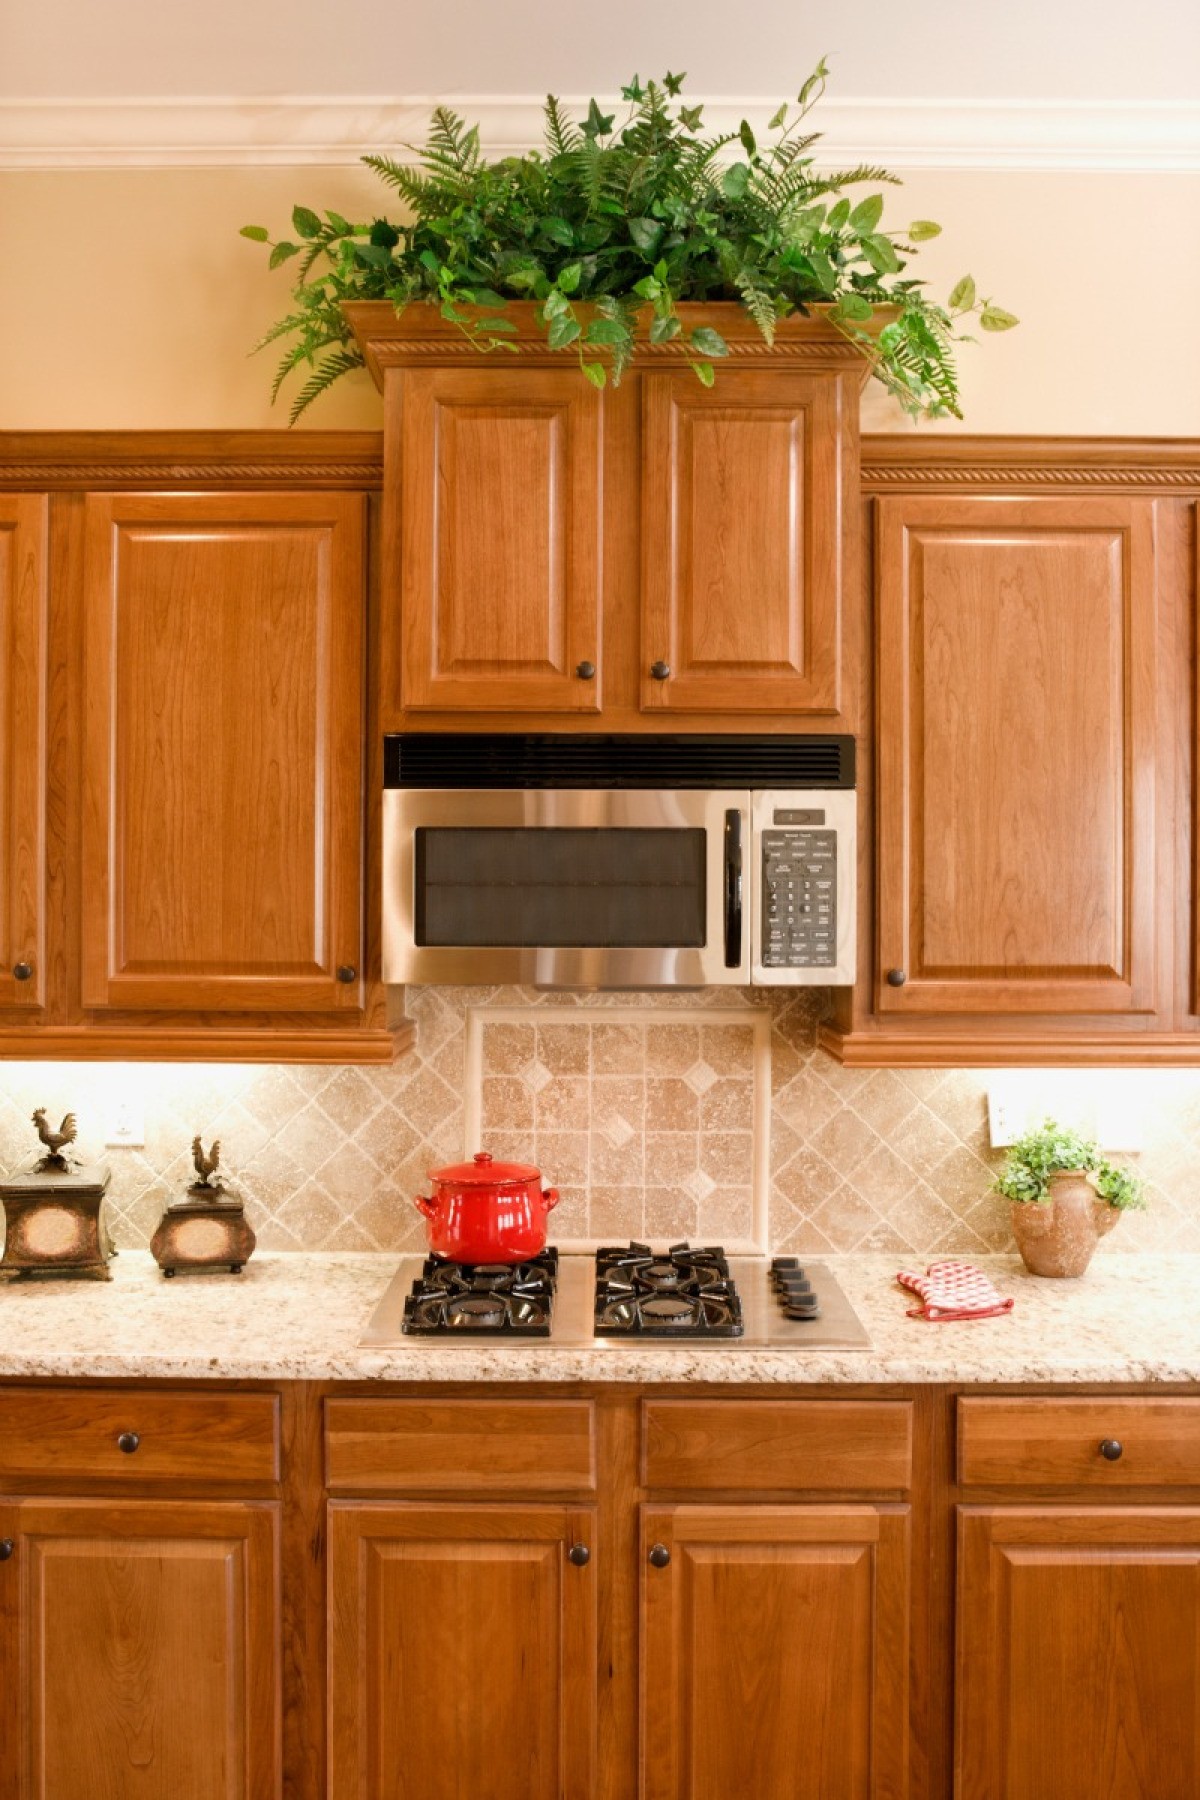 Cleaning Odors From Kitchen Cabinets, Cleaning Oak Cabinets With Vinegar